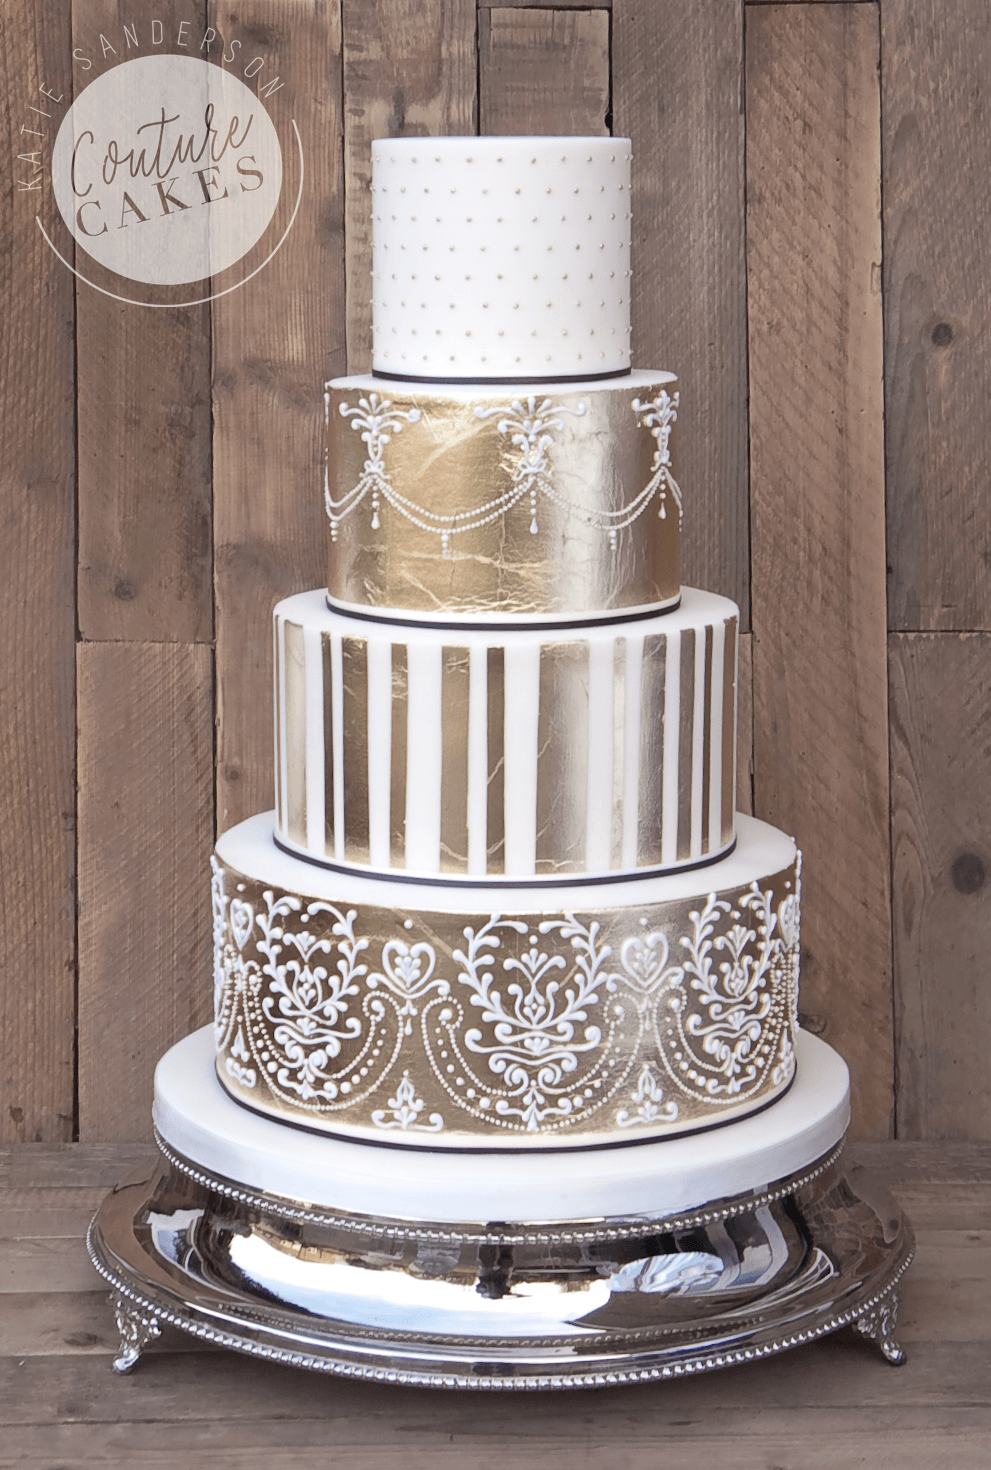 Tiered Wedding Cakes for Stamford Lincolnshire